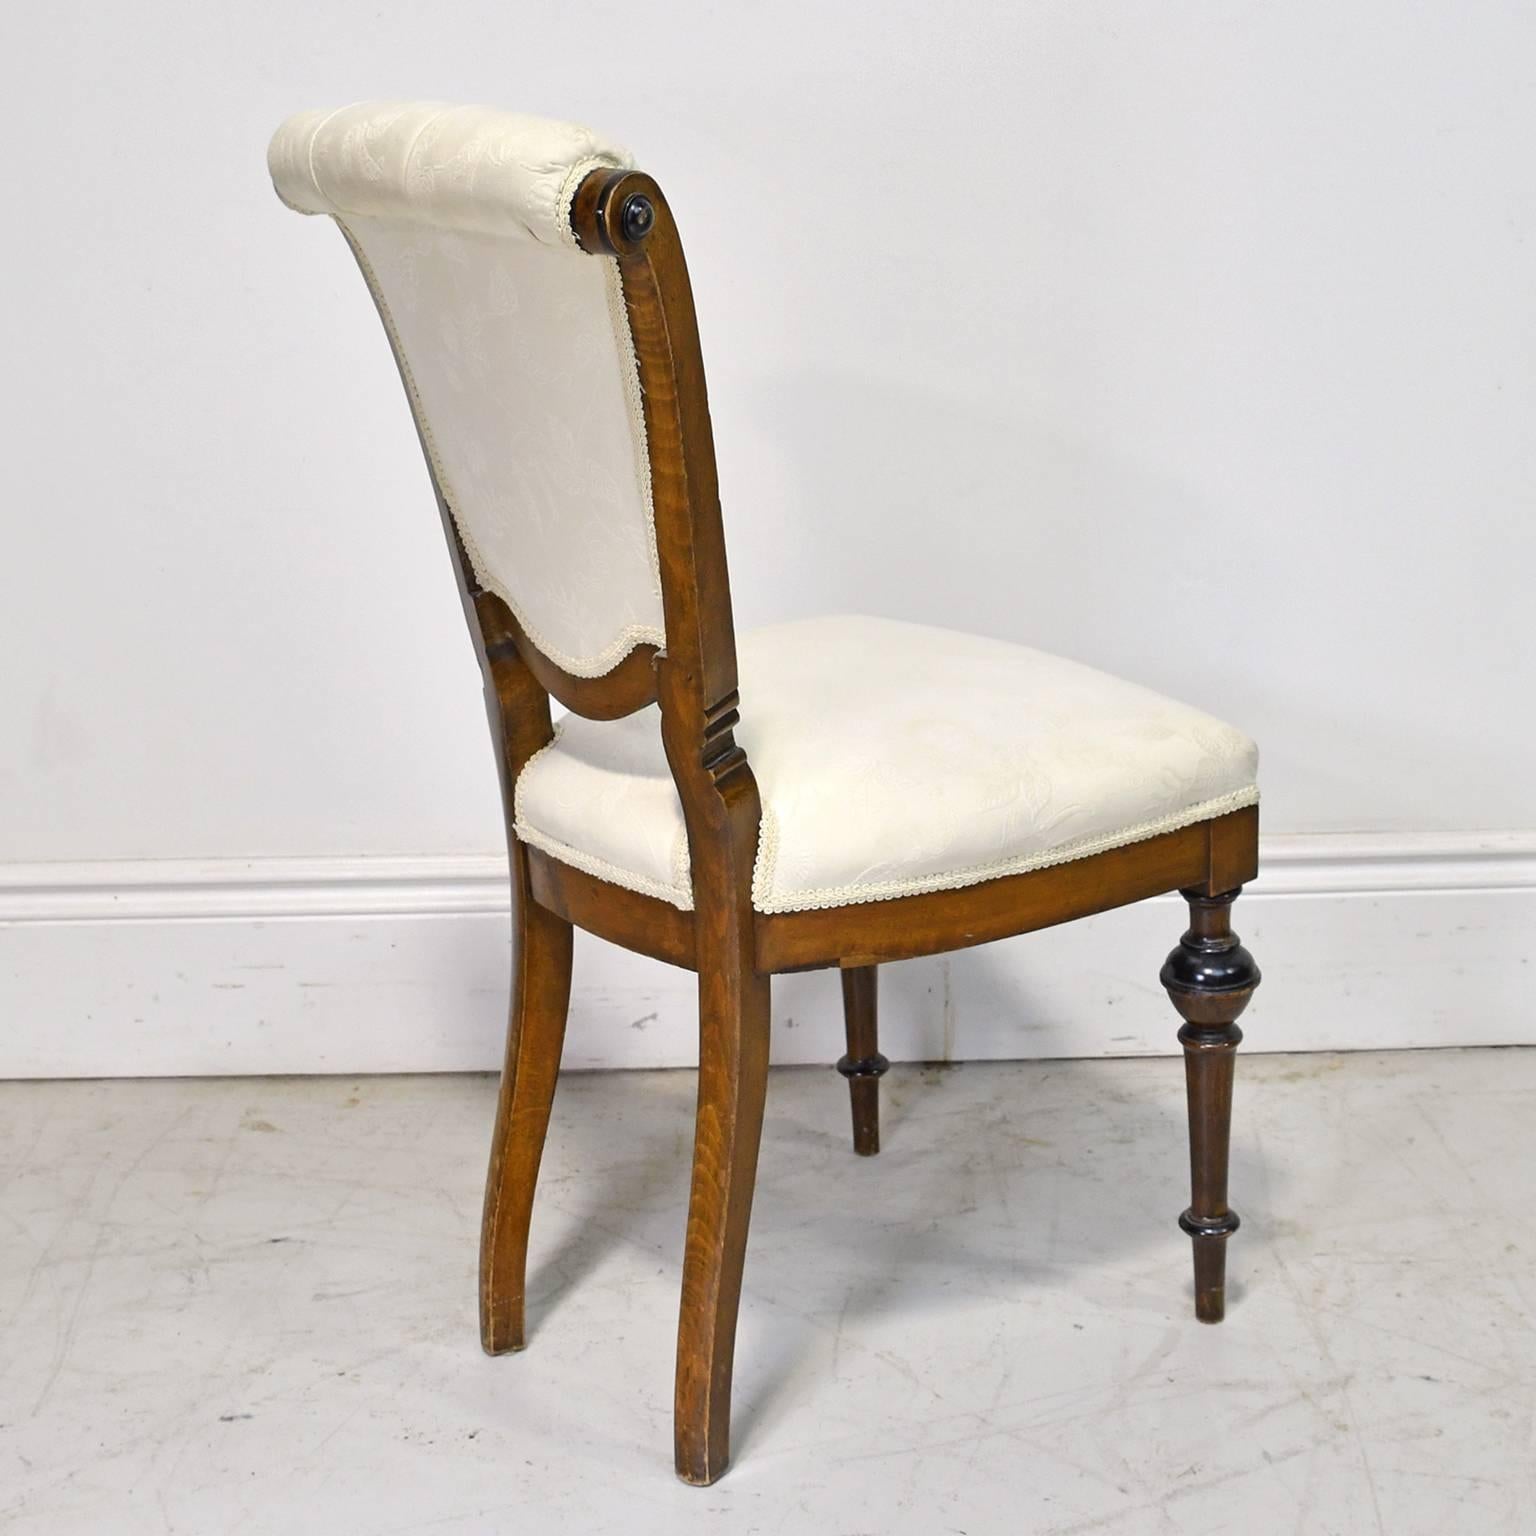 Upholstery 19th Century Walnut Side Chair with Ebonized Bandings, Upholstered Seat and Back